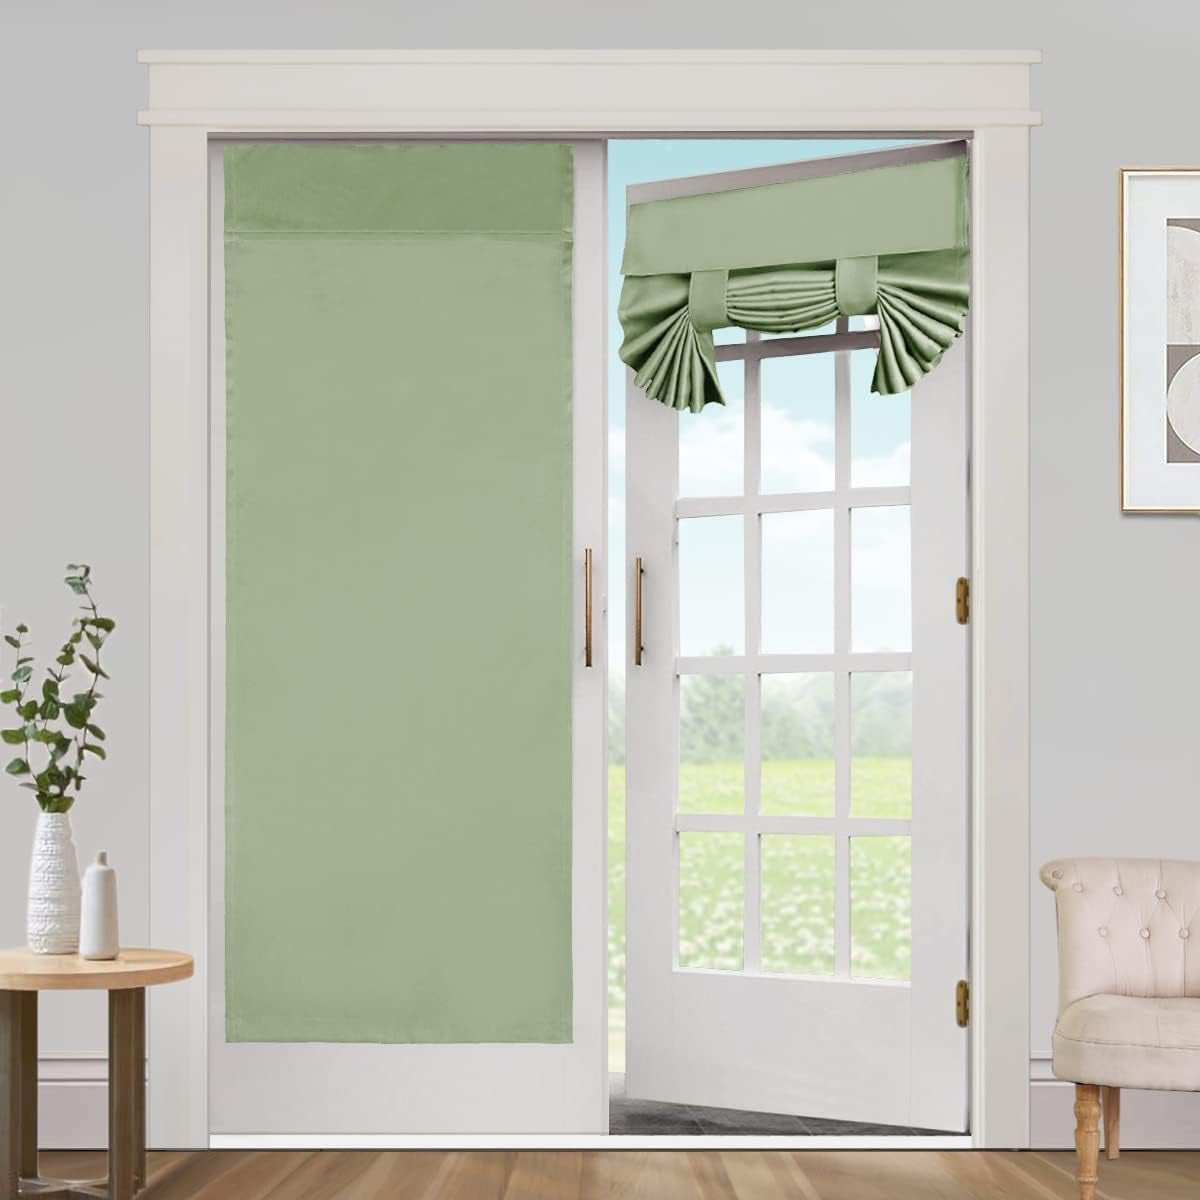 Blackout Curtains for French Doors - Thermal Insulated Tricia Door Window Curtain for Patio Door, Self Stick Tie up Shade Energy Efficient Double Door Blind, 26 X 68 Inches, 1 Panel, Sage  L.VICTEX Sage 2 